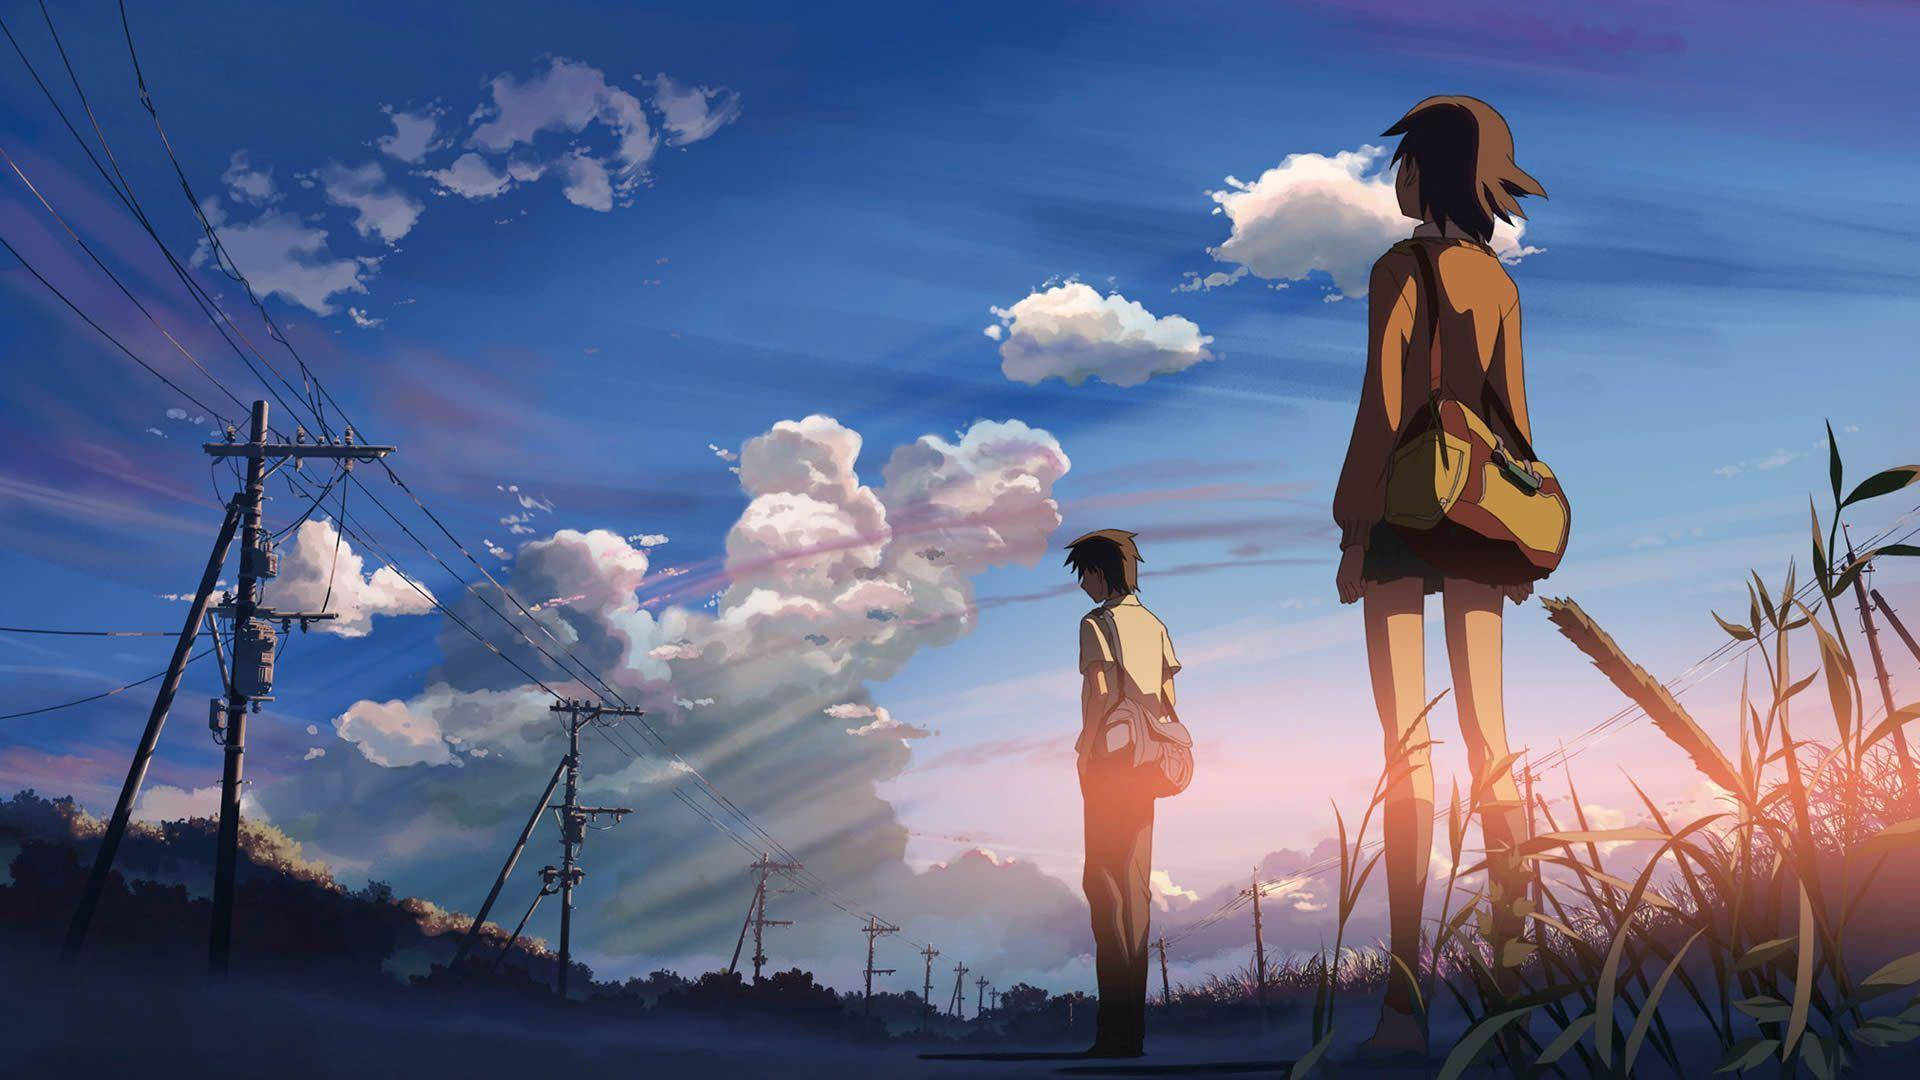 Beautiful Anime 5 Centimeters Per Second Background